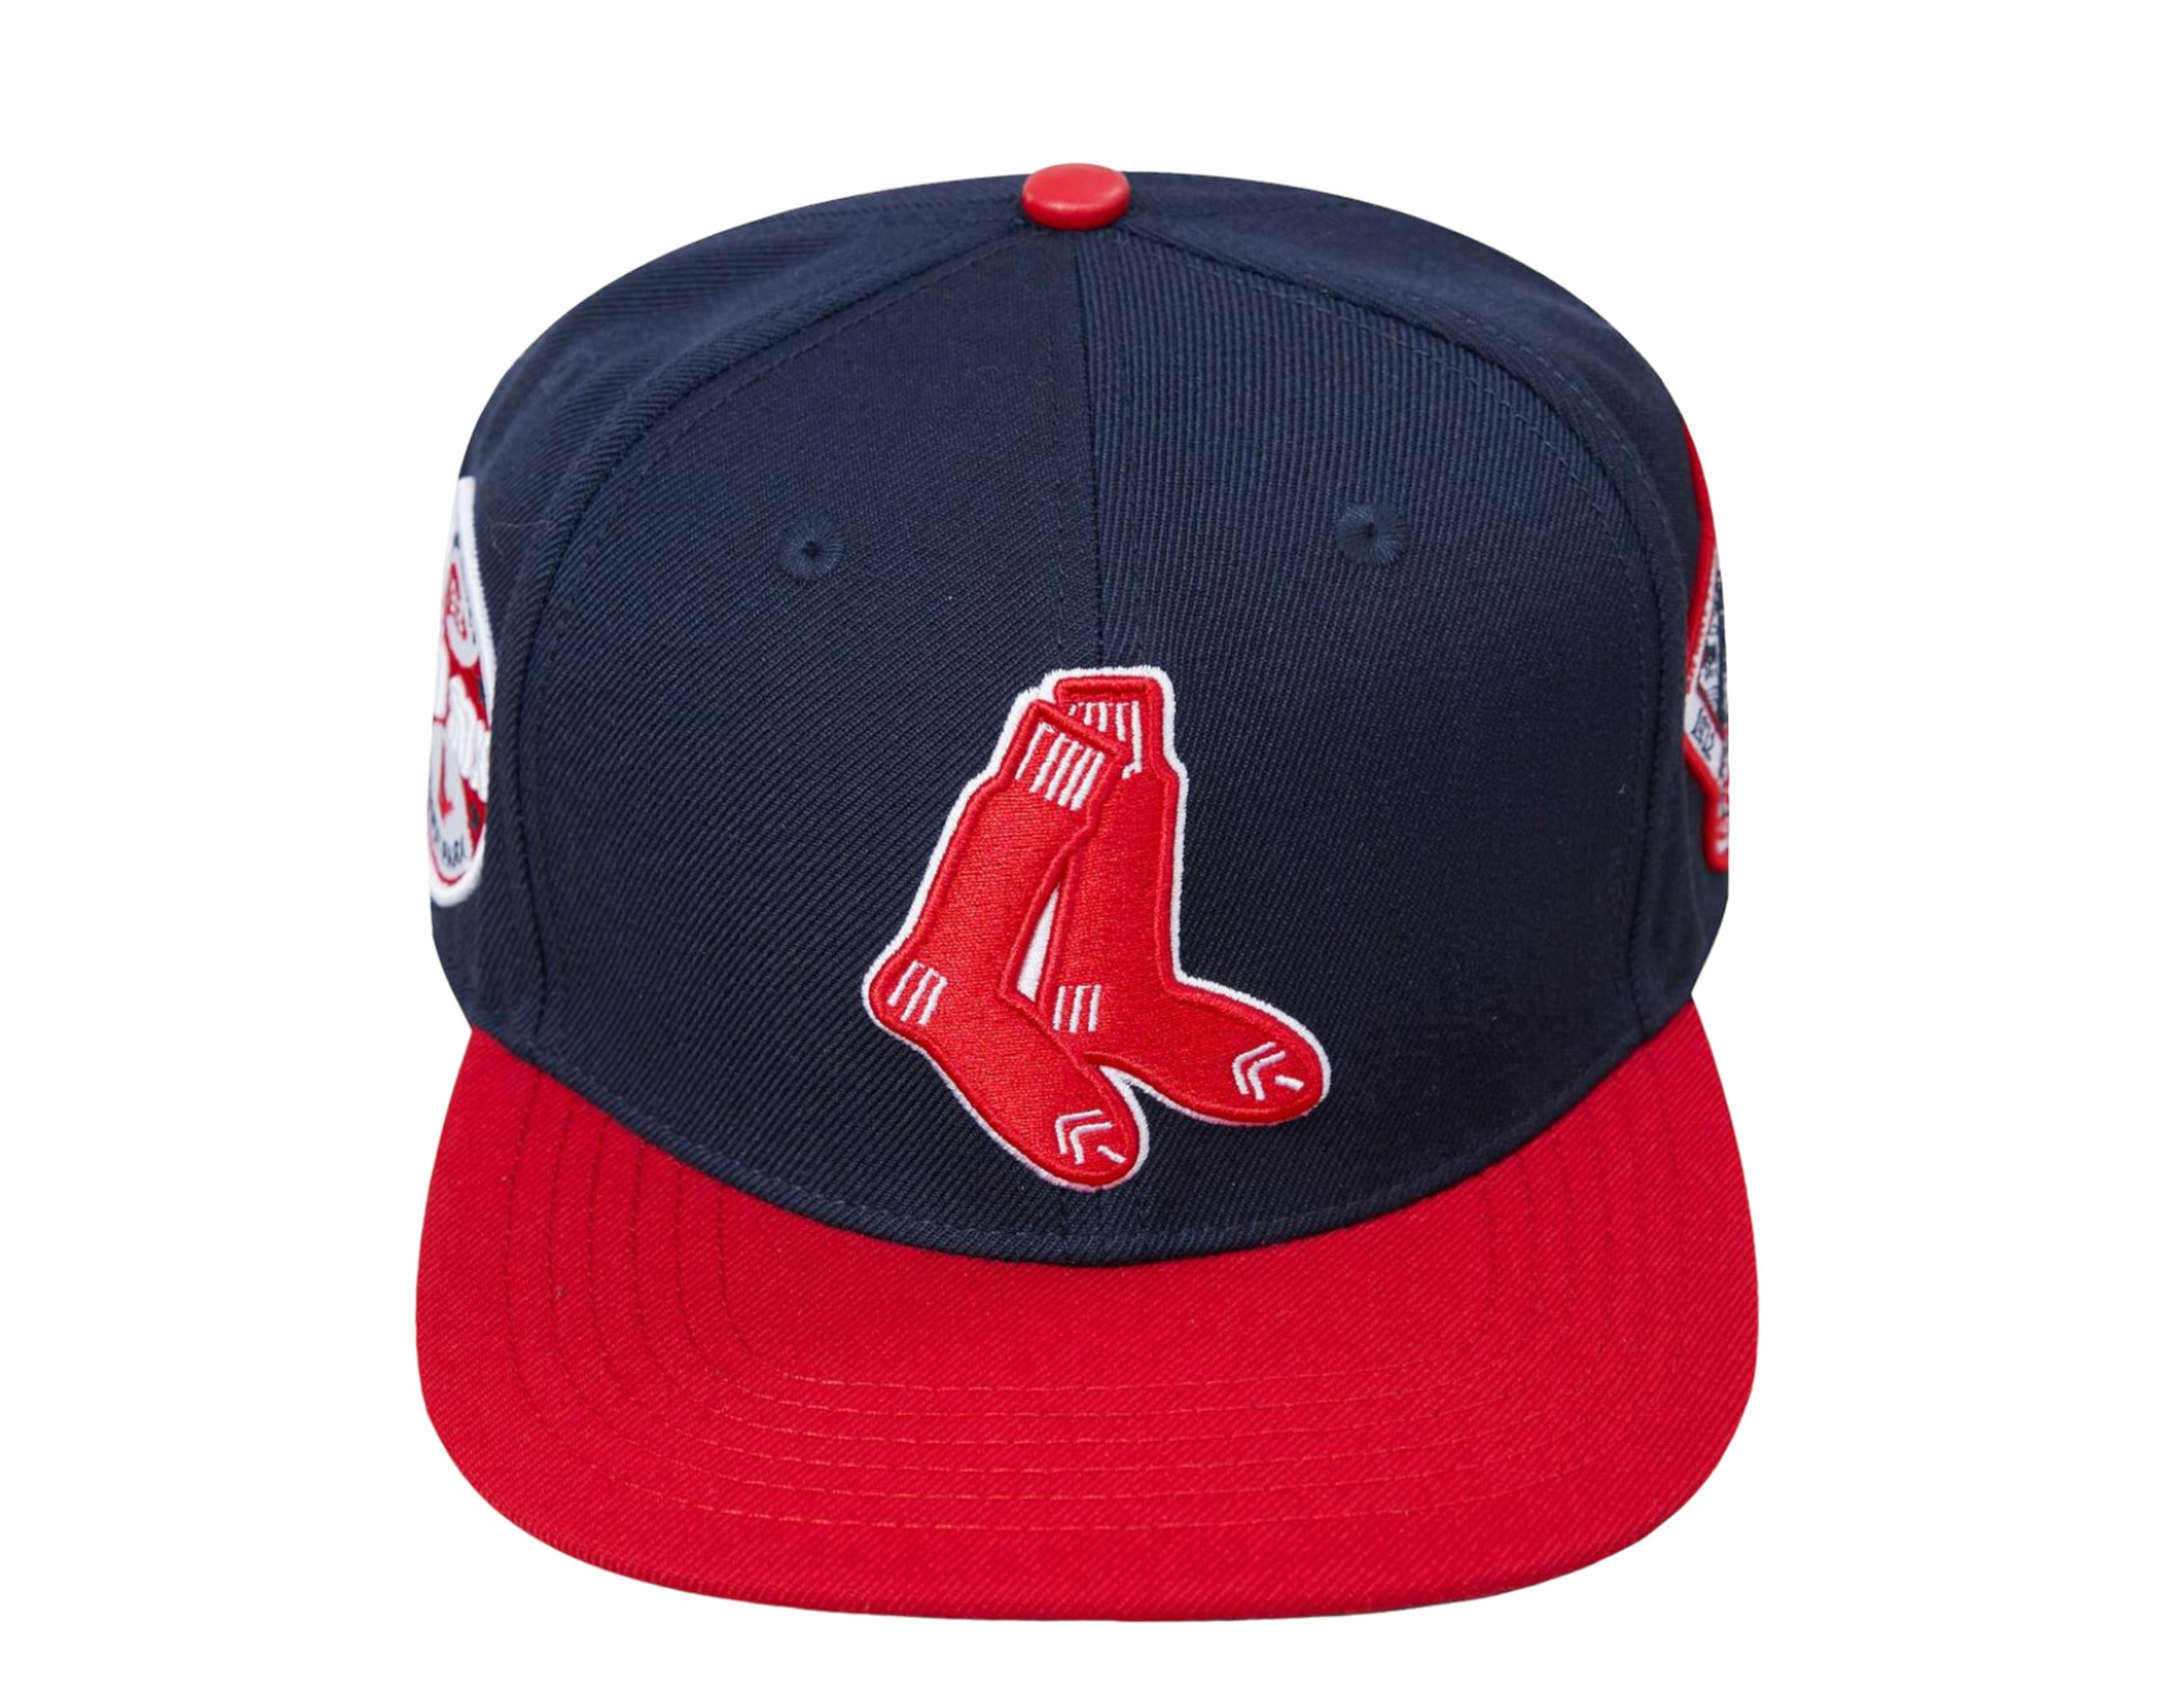 Boston Red Sox Wordmark Logo  Red sox logo, Boston red sox jersey, Red sox